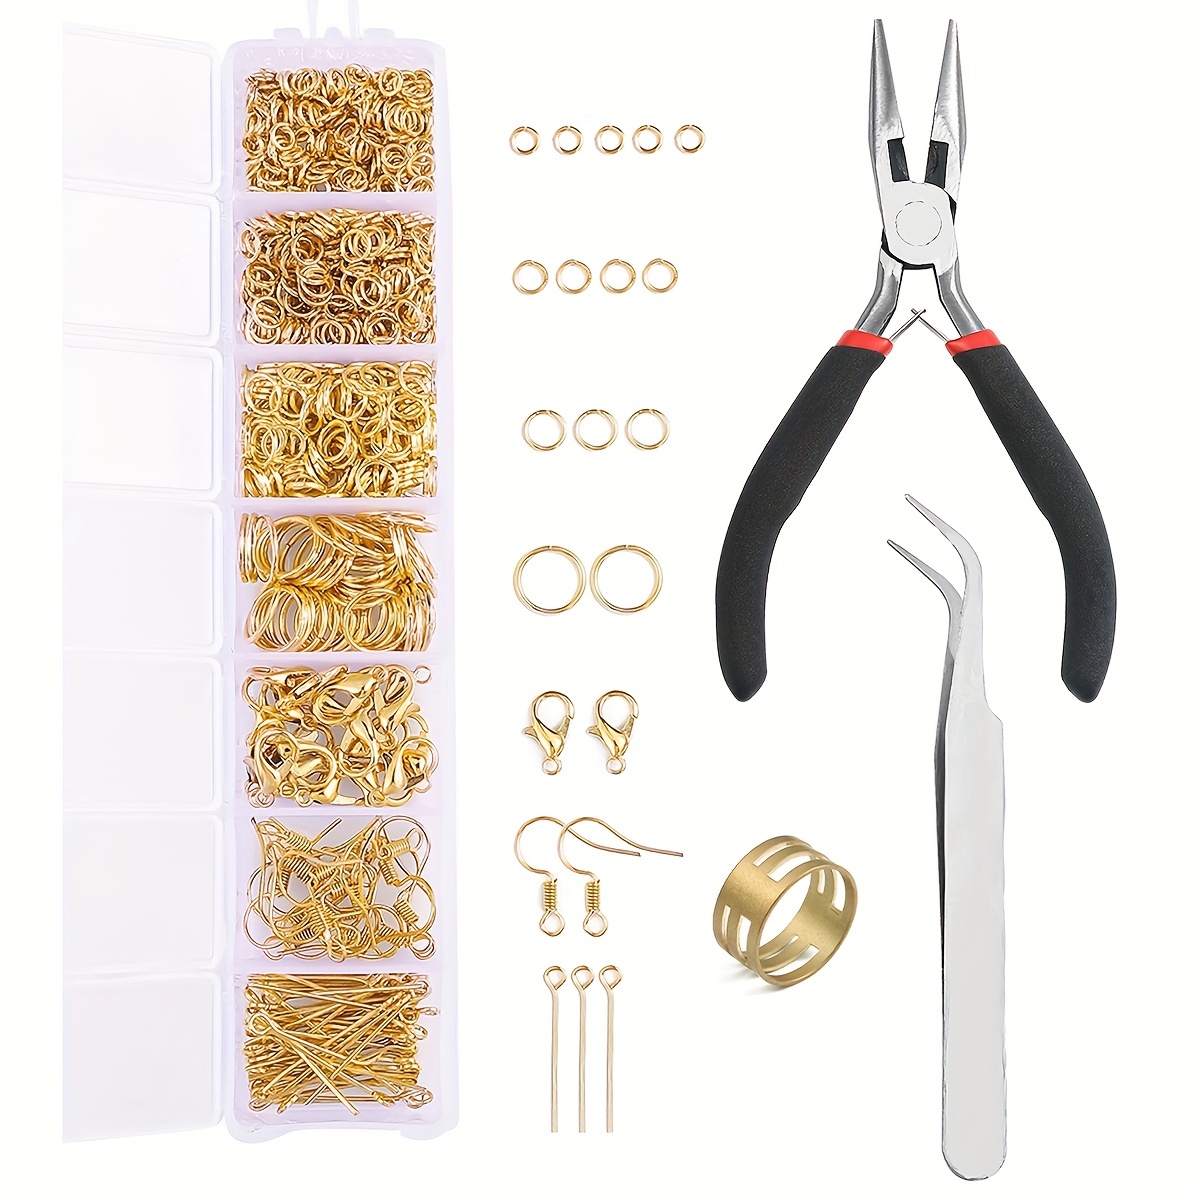 Jewelry Pliers Set Paxcoo 3pcs Jewelry Making Pliers Tools Kit Includes Needle Nose Pliers Round Nose Pliers Wire Cutters for Jewelry Making Suppl